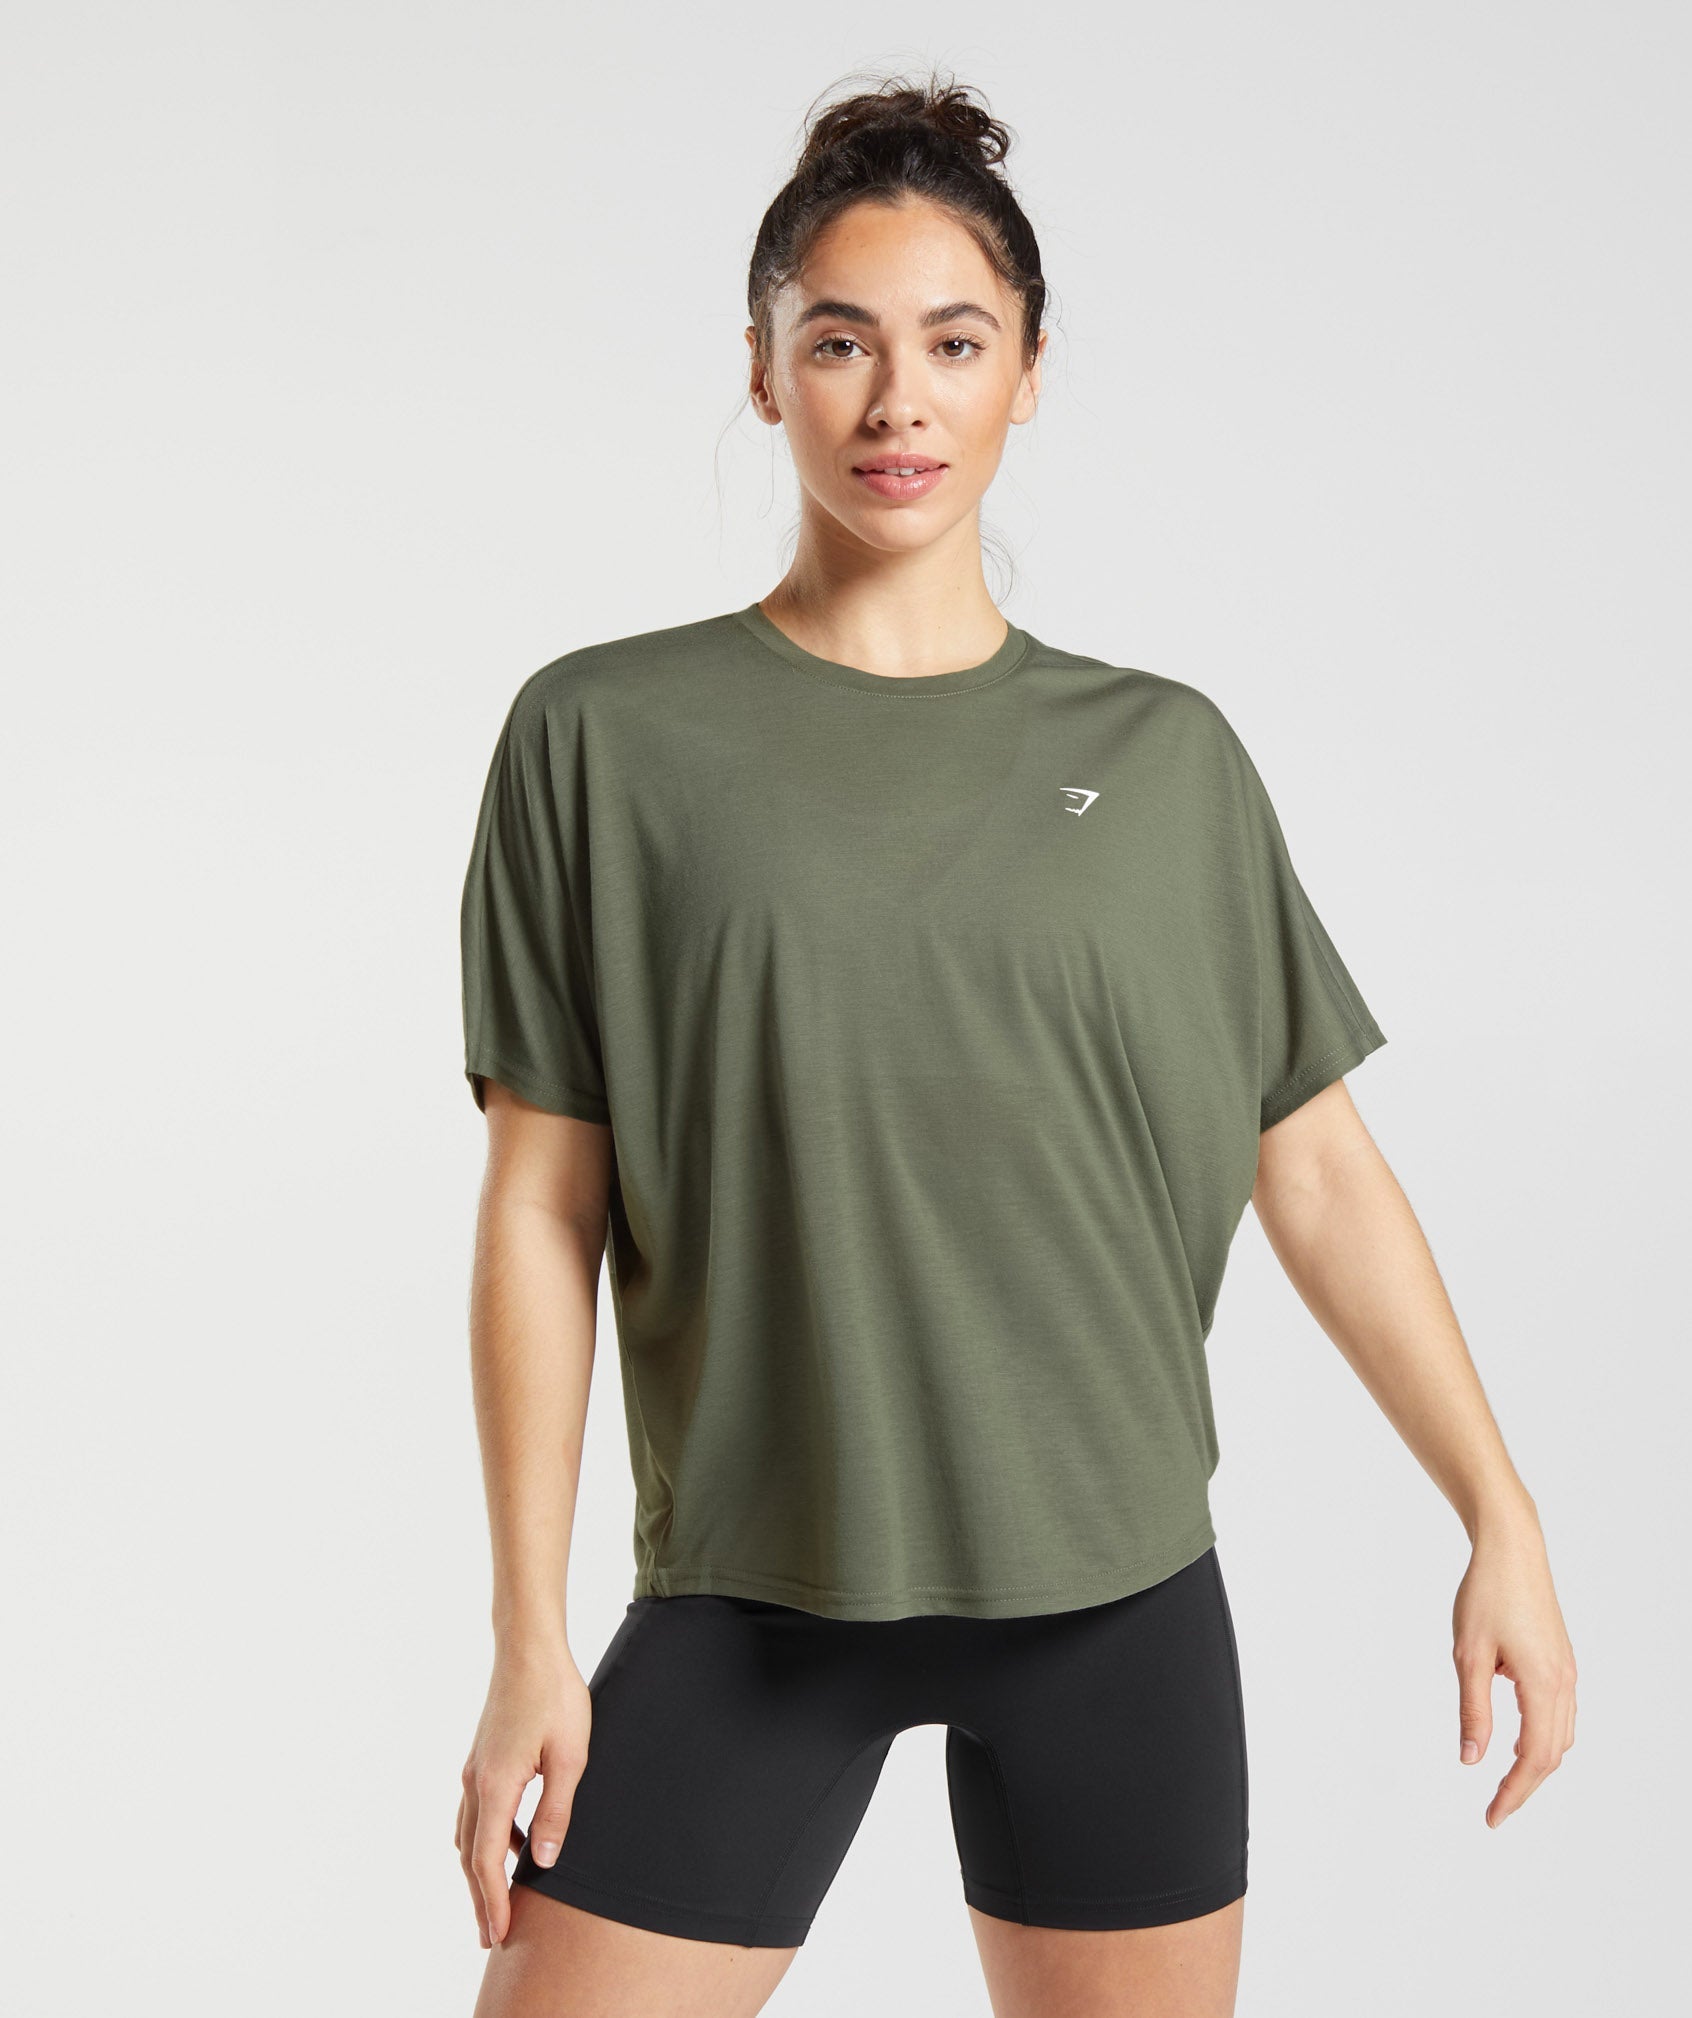 Super Soft T-Shirt in Dusty Olive - view 1